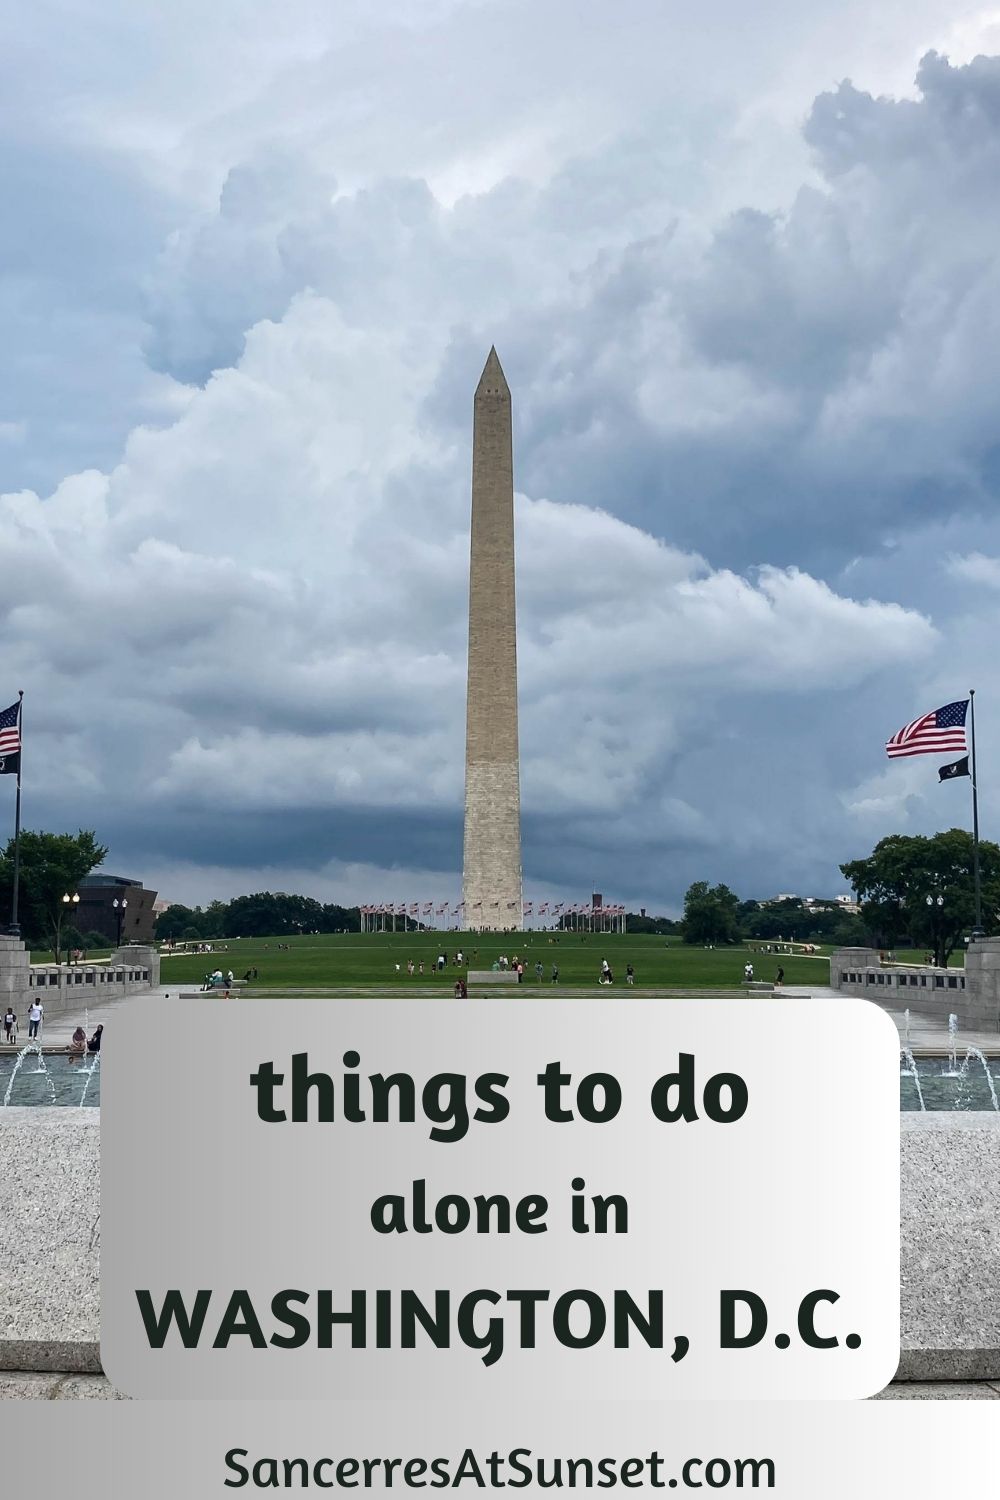 Things to Do Alone in Washington, D.C.